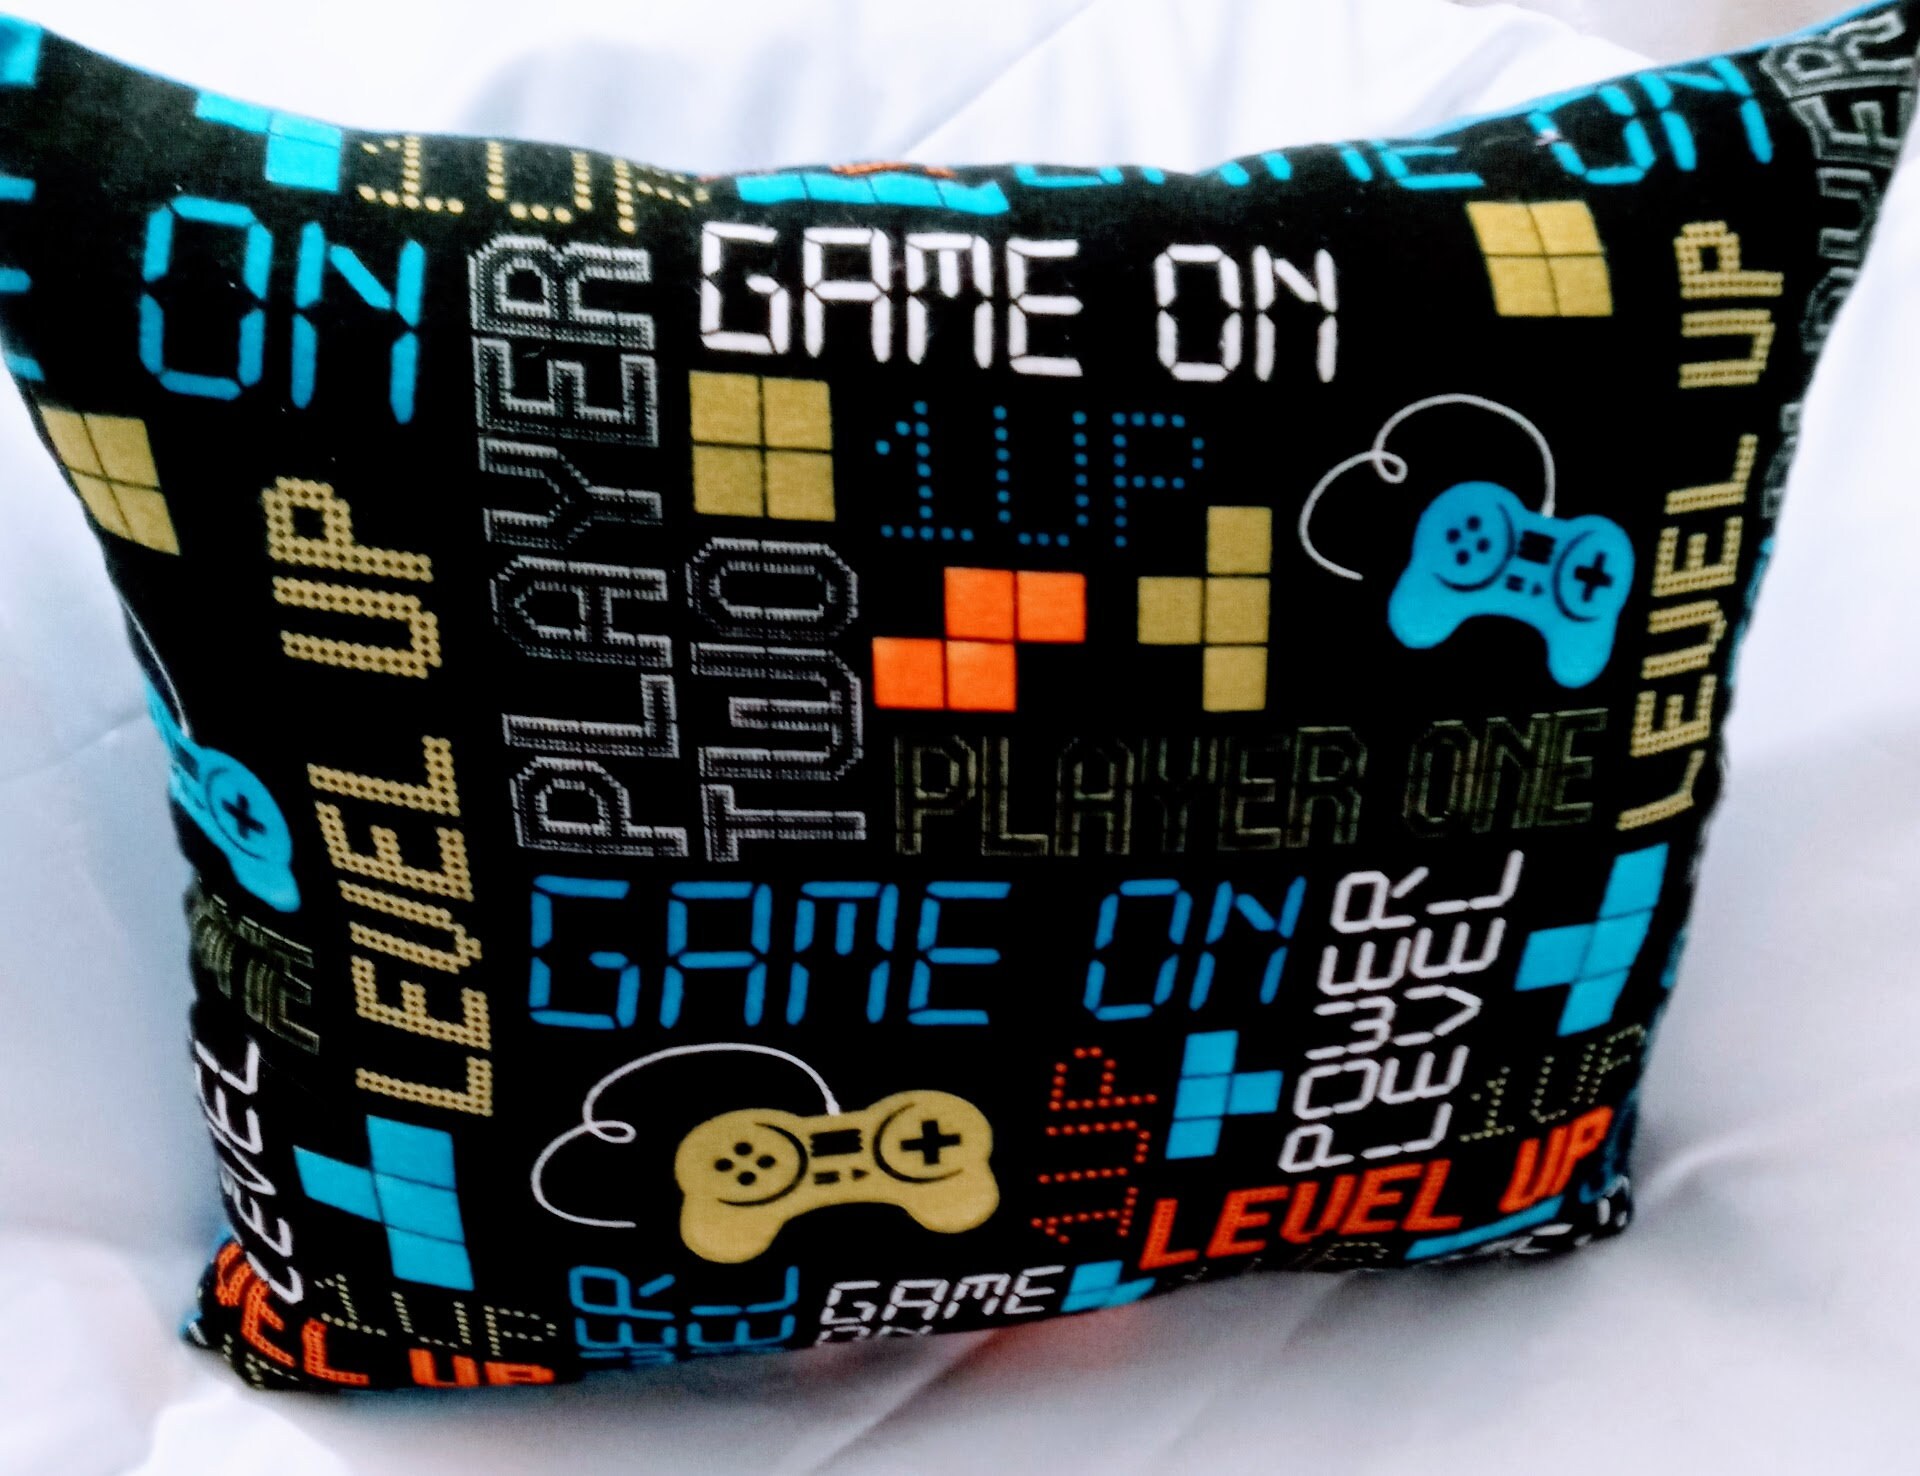 Gamer Today s Good Mood Is Sponsoring By Gaming' Throw Pillow Cover 18” x  18”